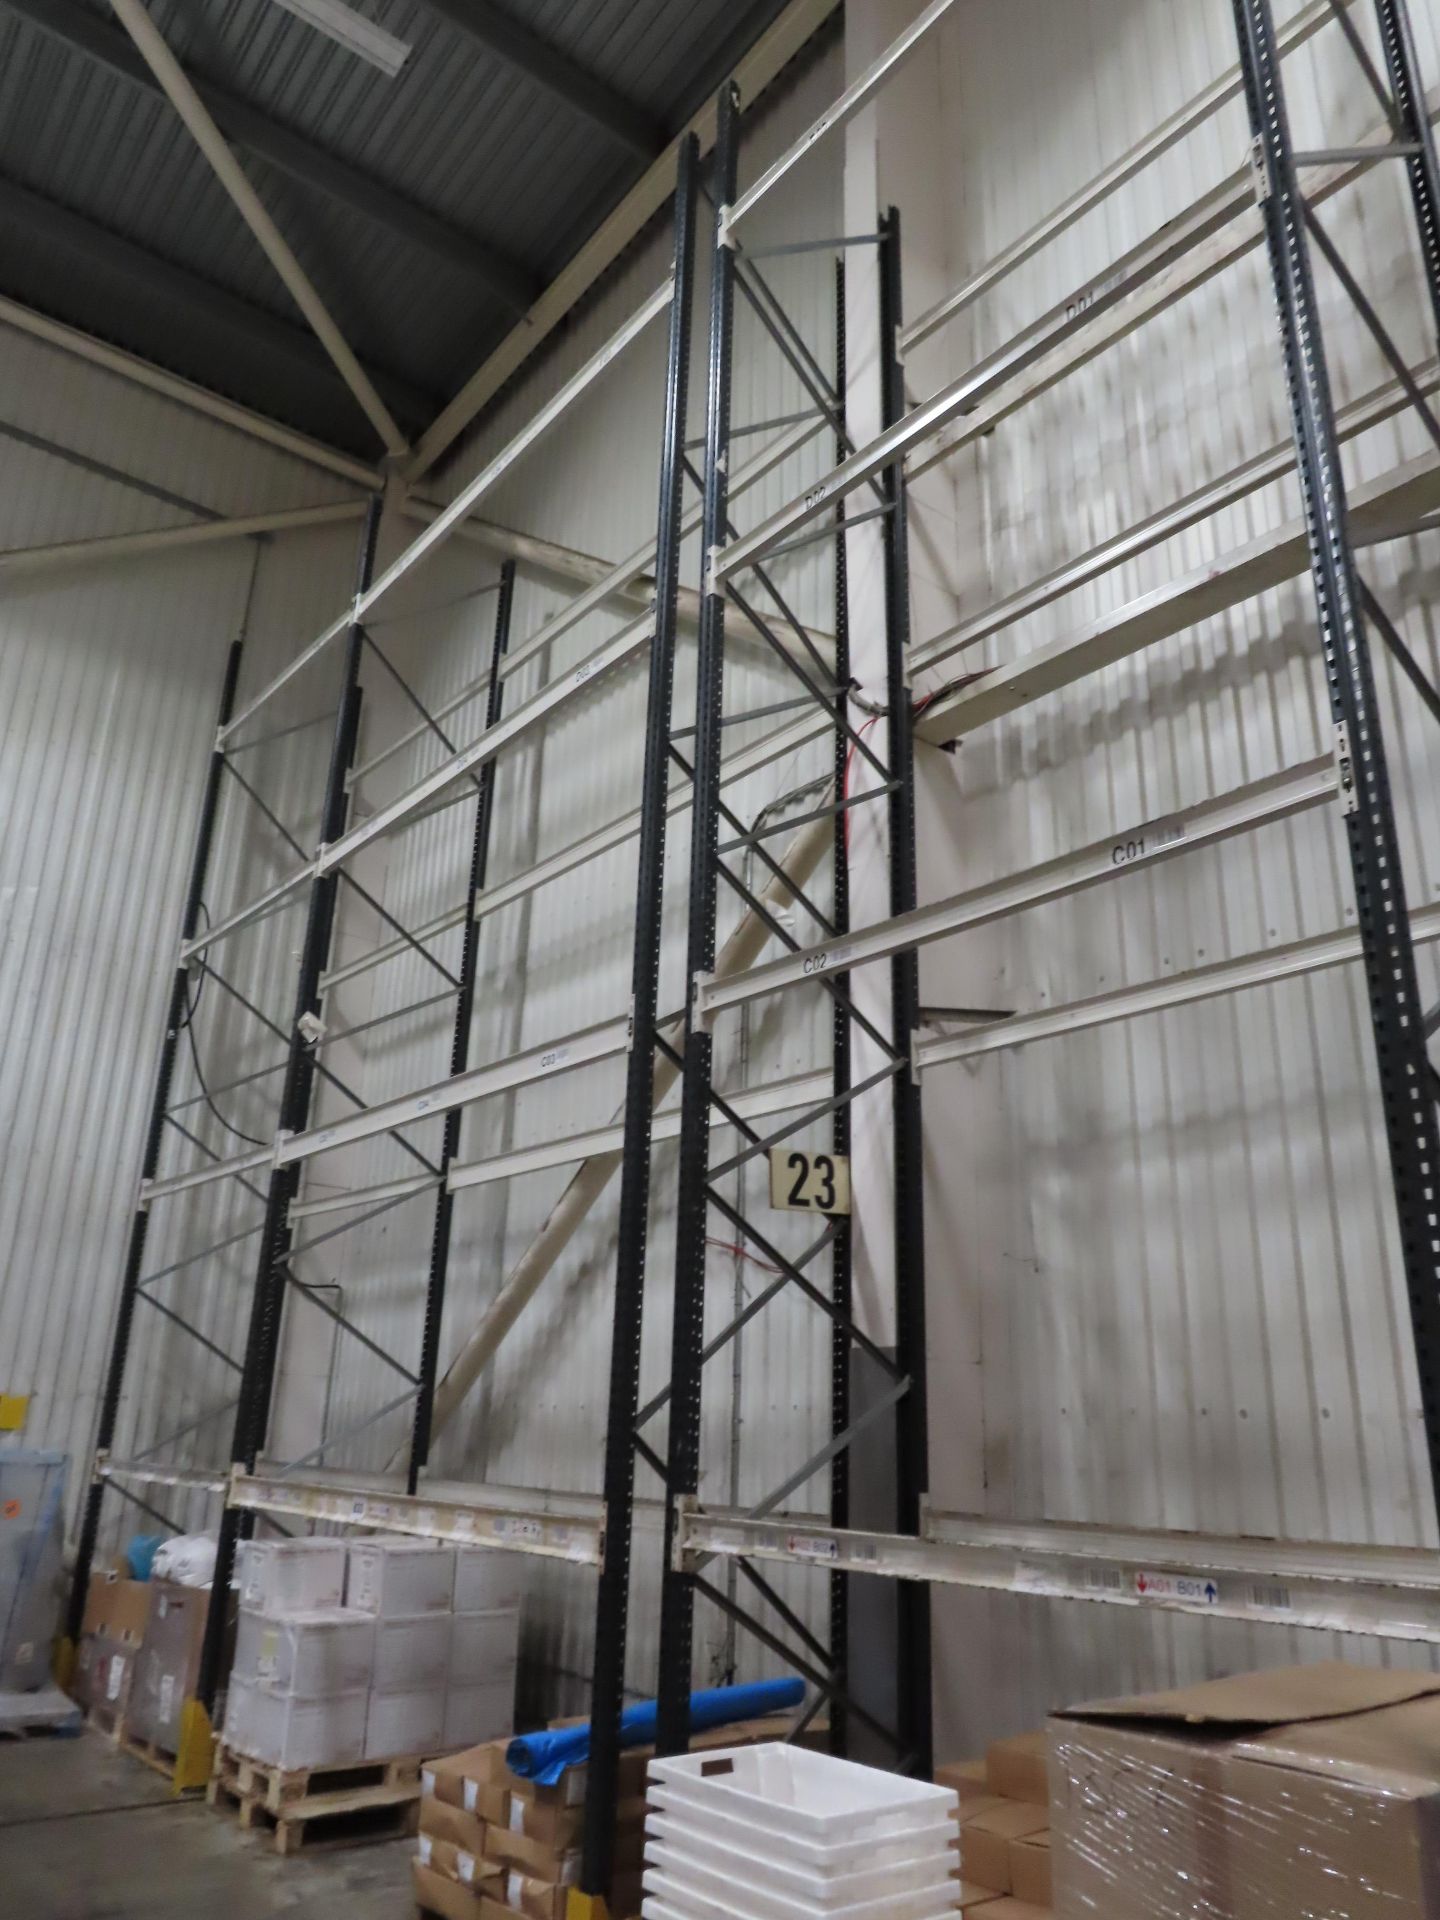 3 X SECTIONS OF PALLET RACKING.